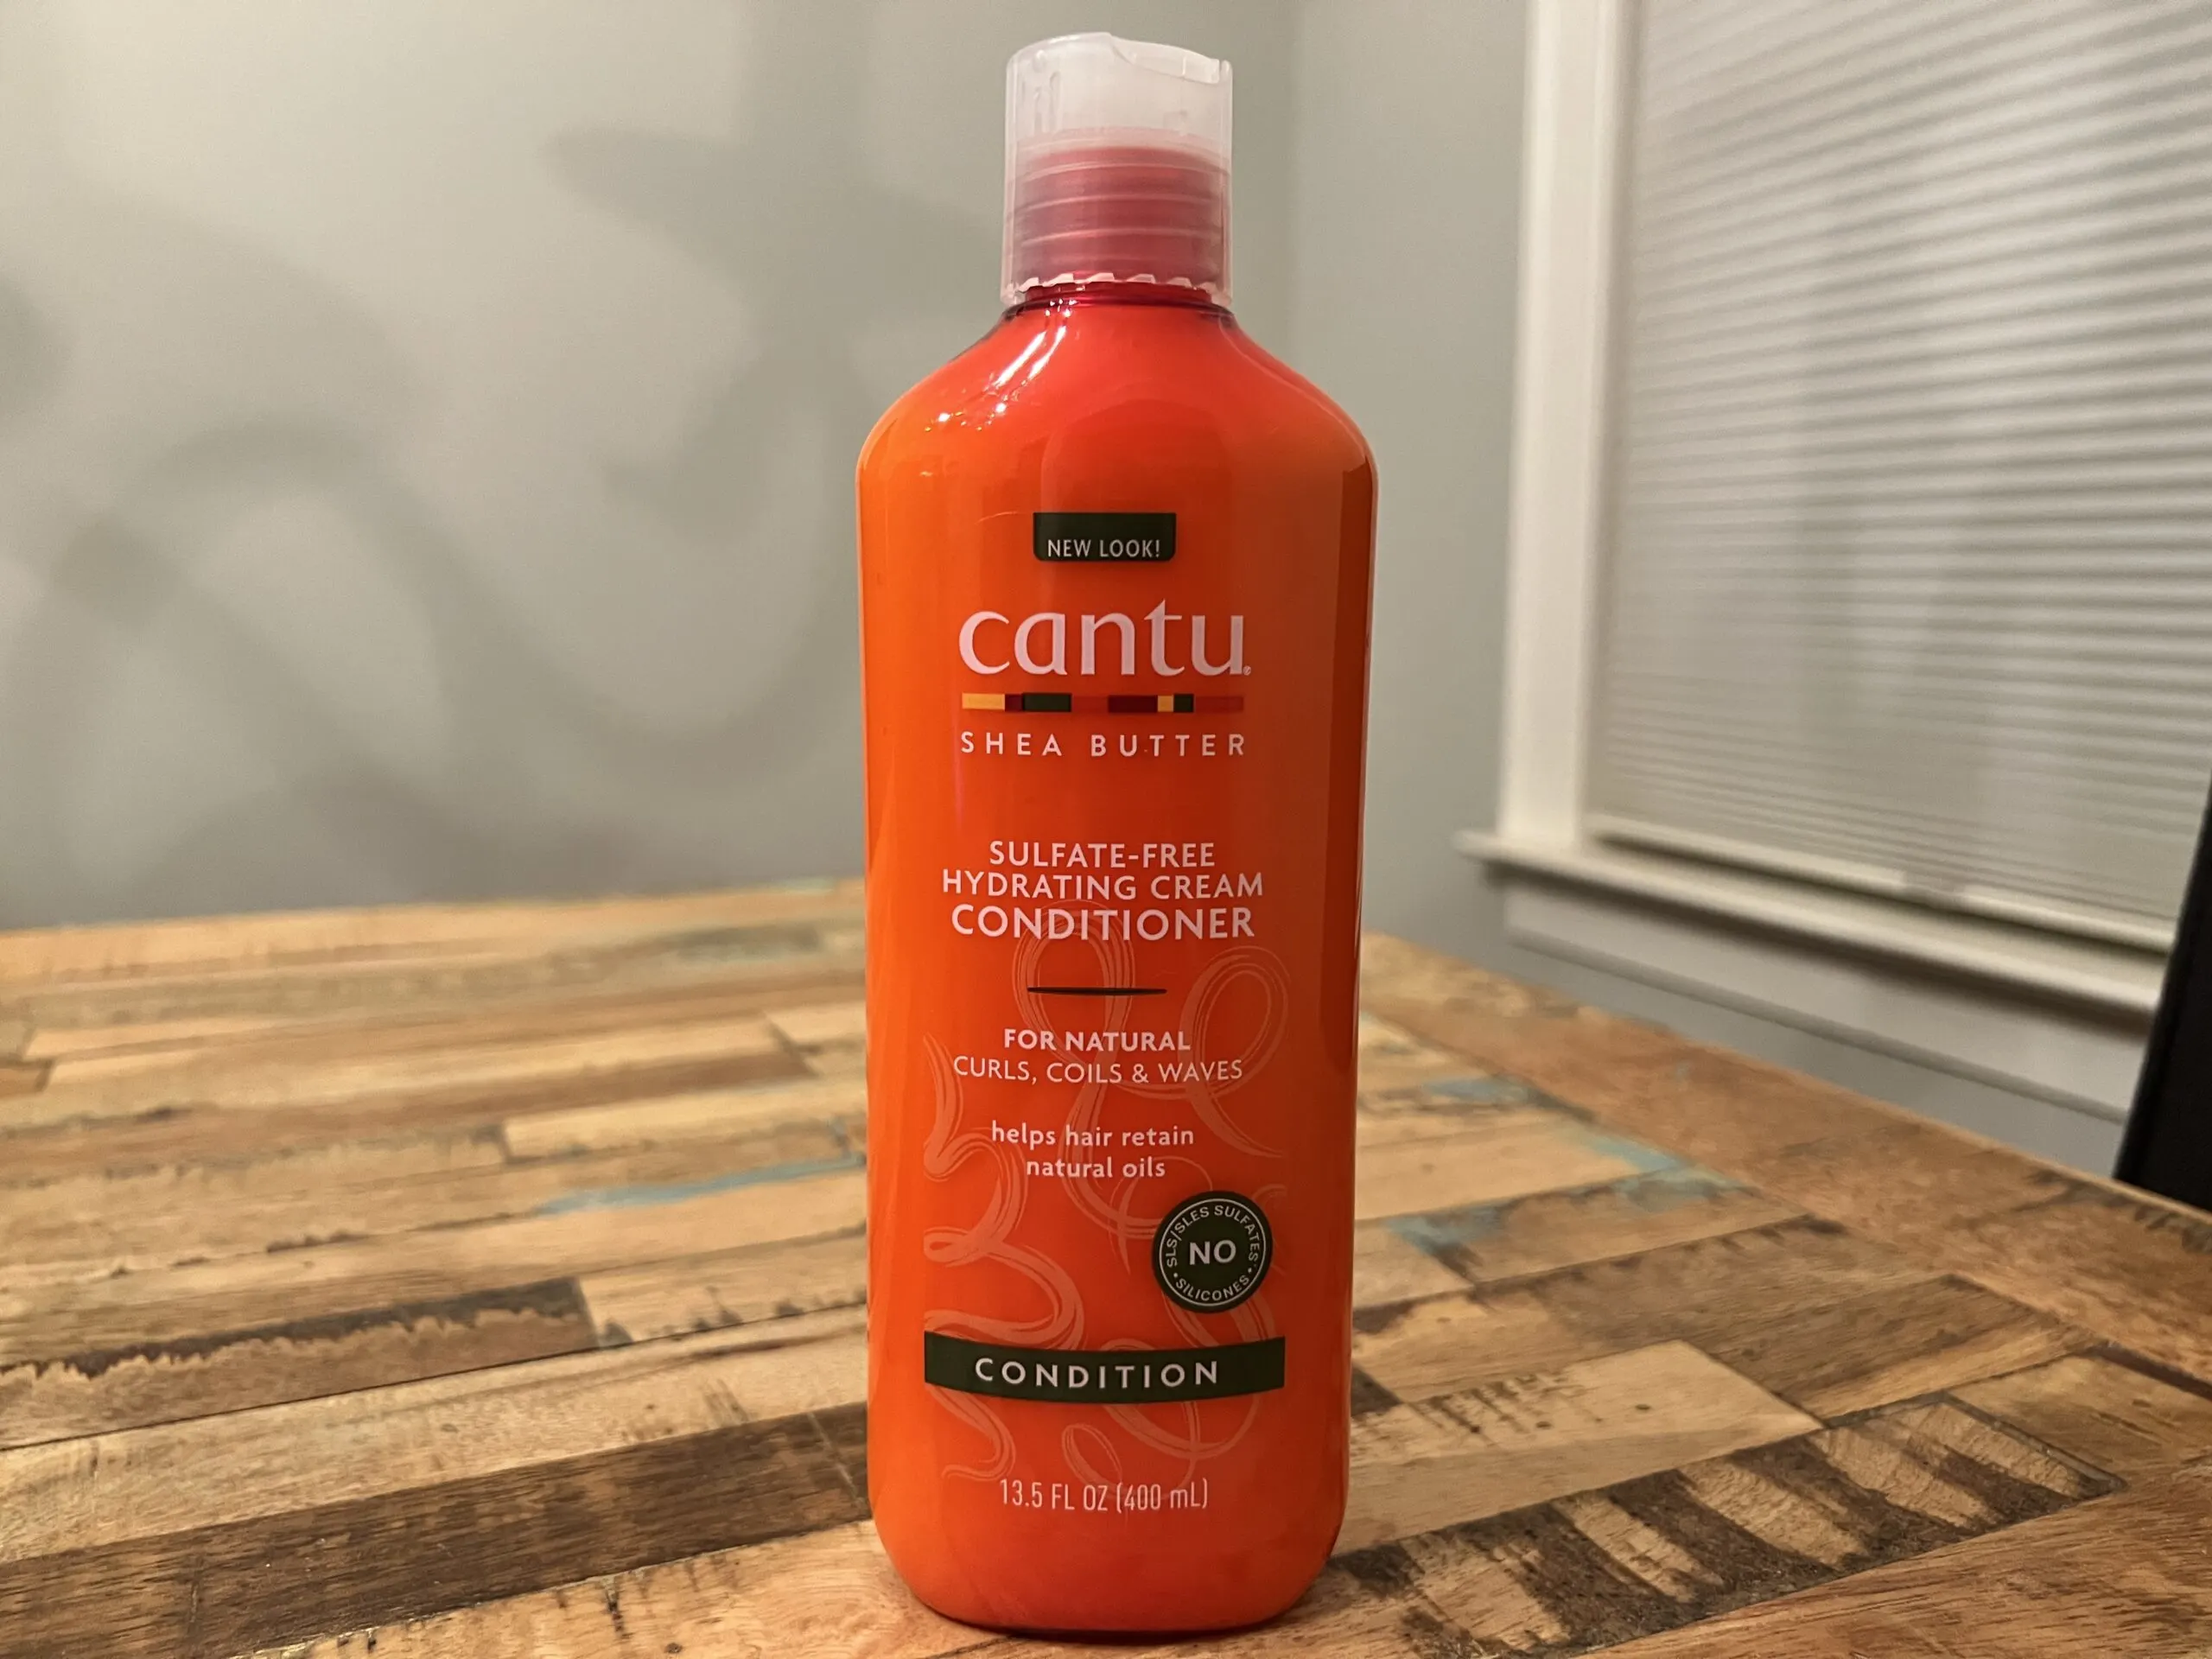 Cantu Shea Butter Sulfate-Free Hydrating Cream Conditioner bottle, ideal for moisturizing natural hair and retaining oils.